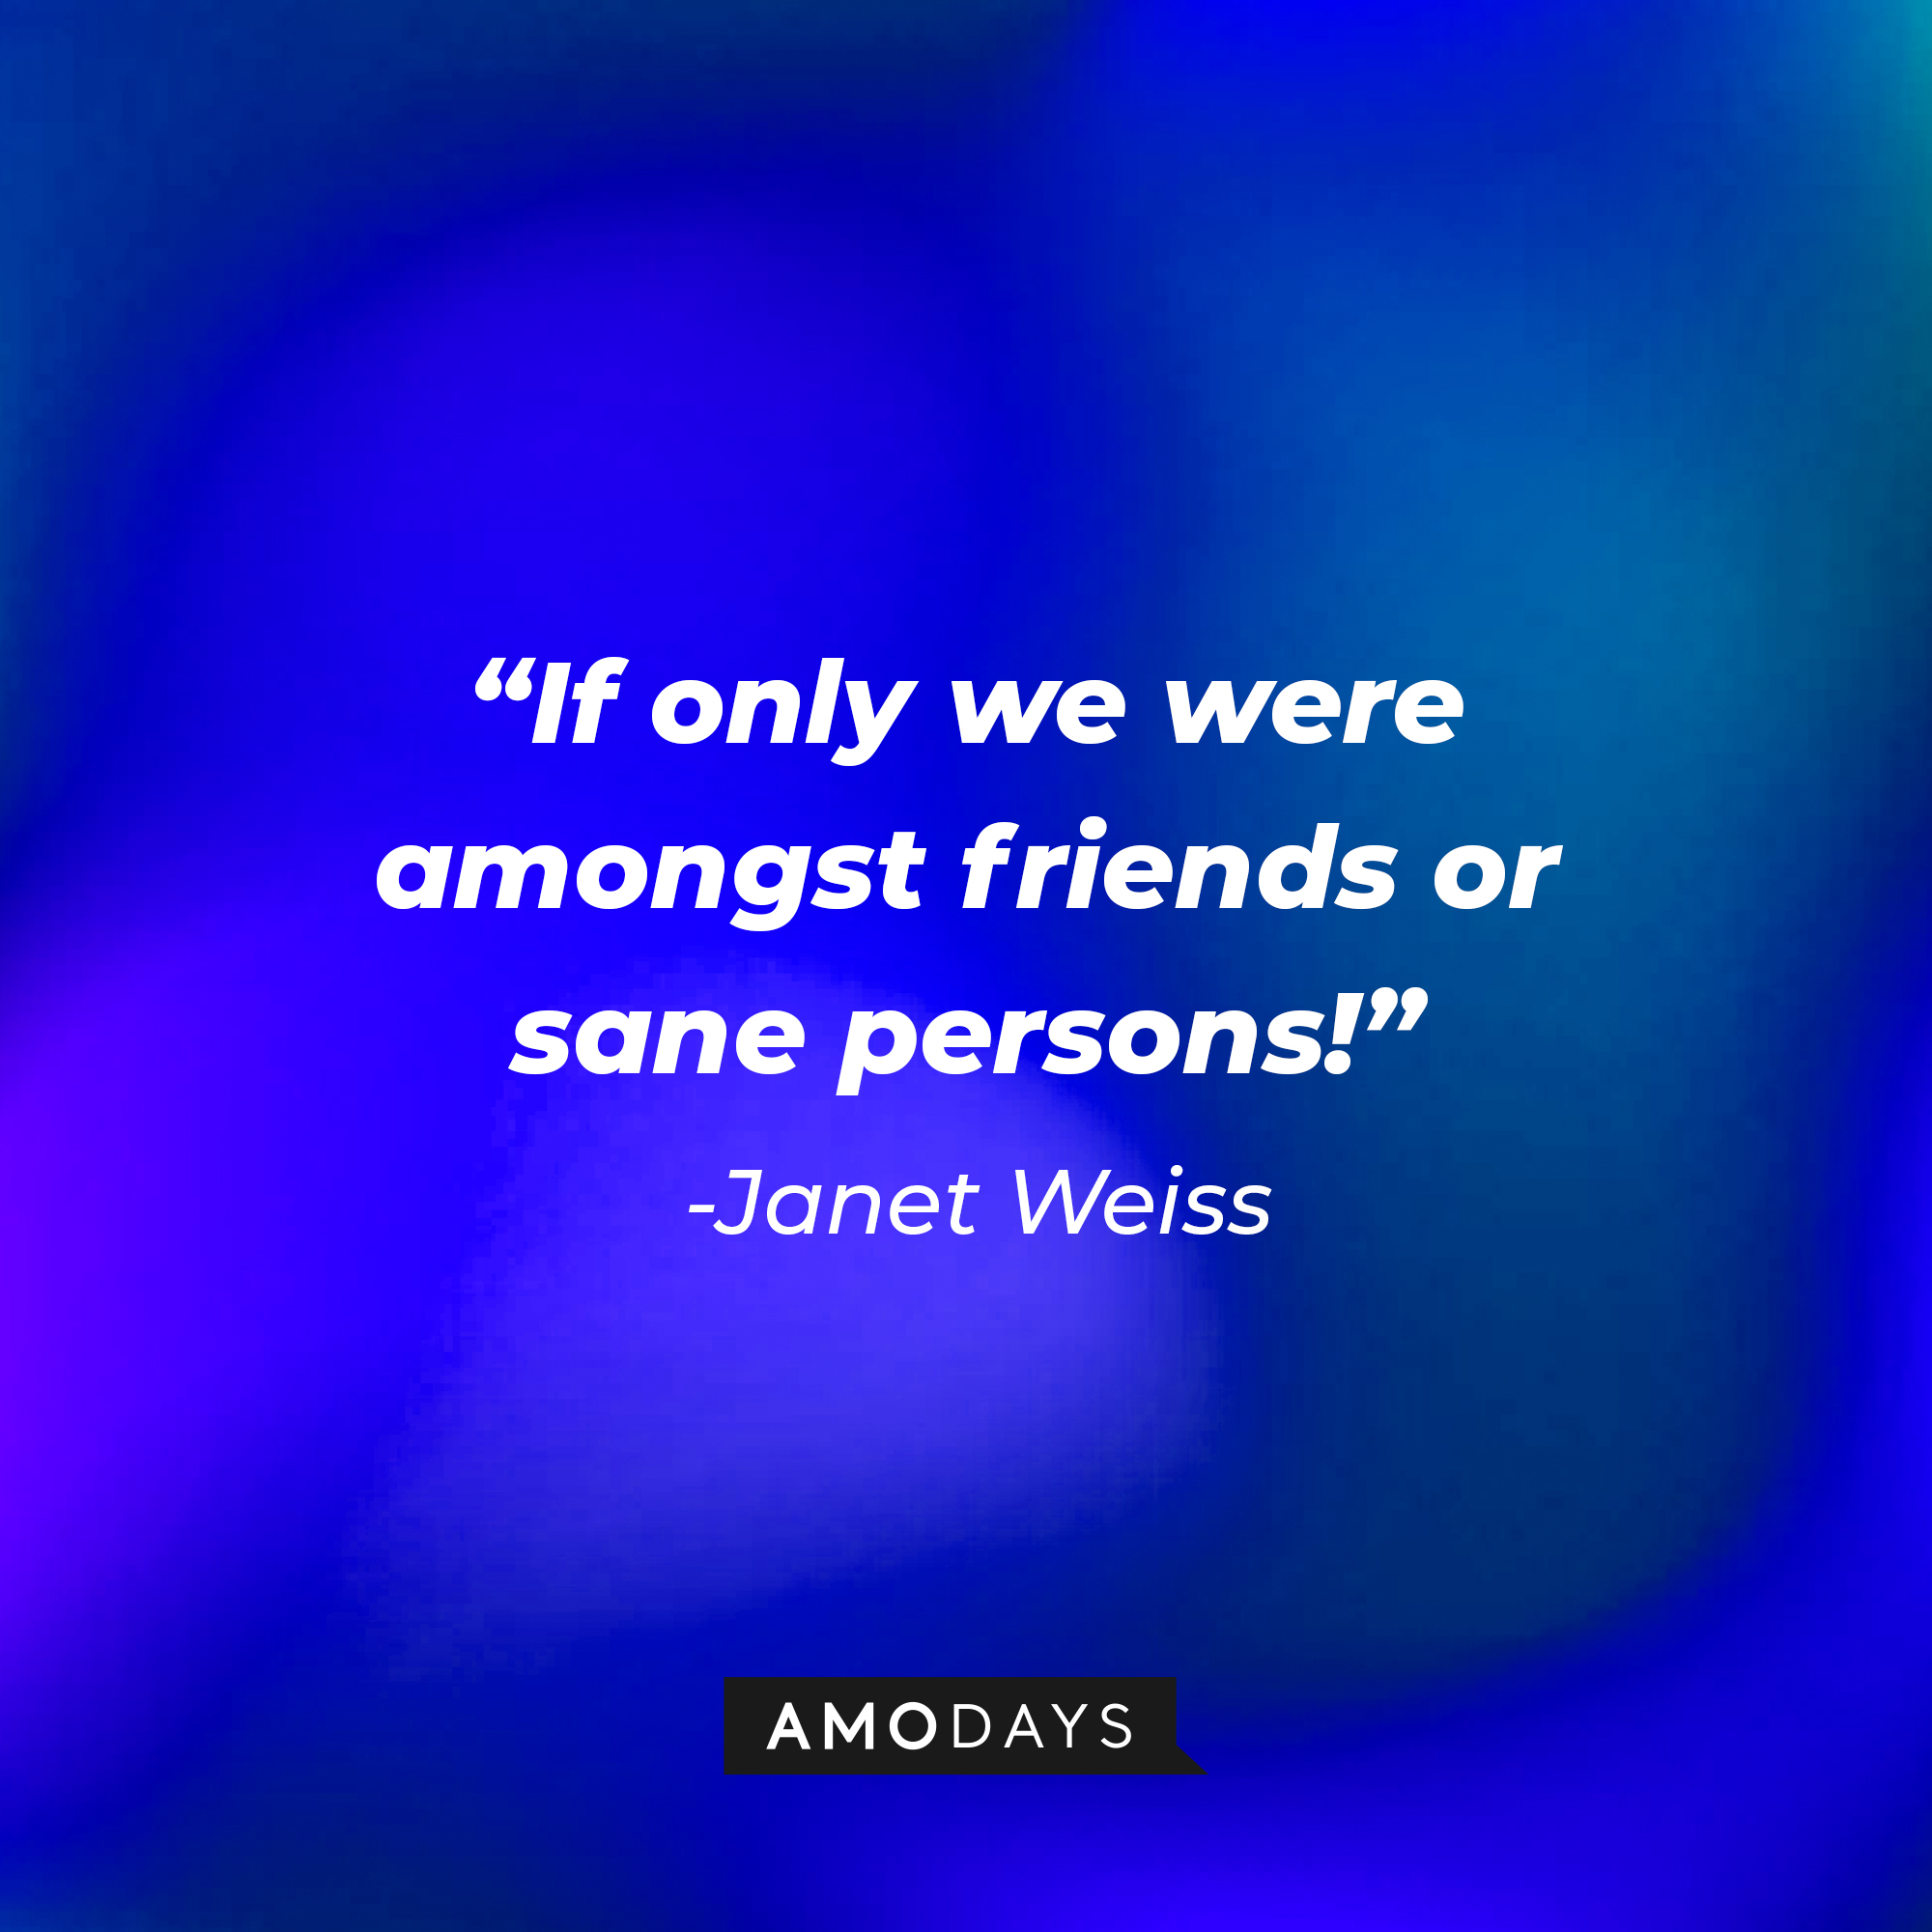 Janet Weiss's quote: "If only we were amongst friends or sane persons!" | Source: AmoDays